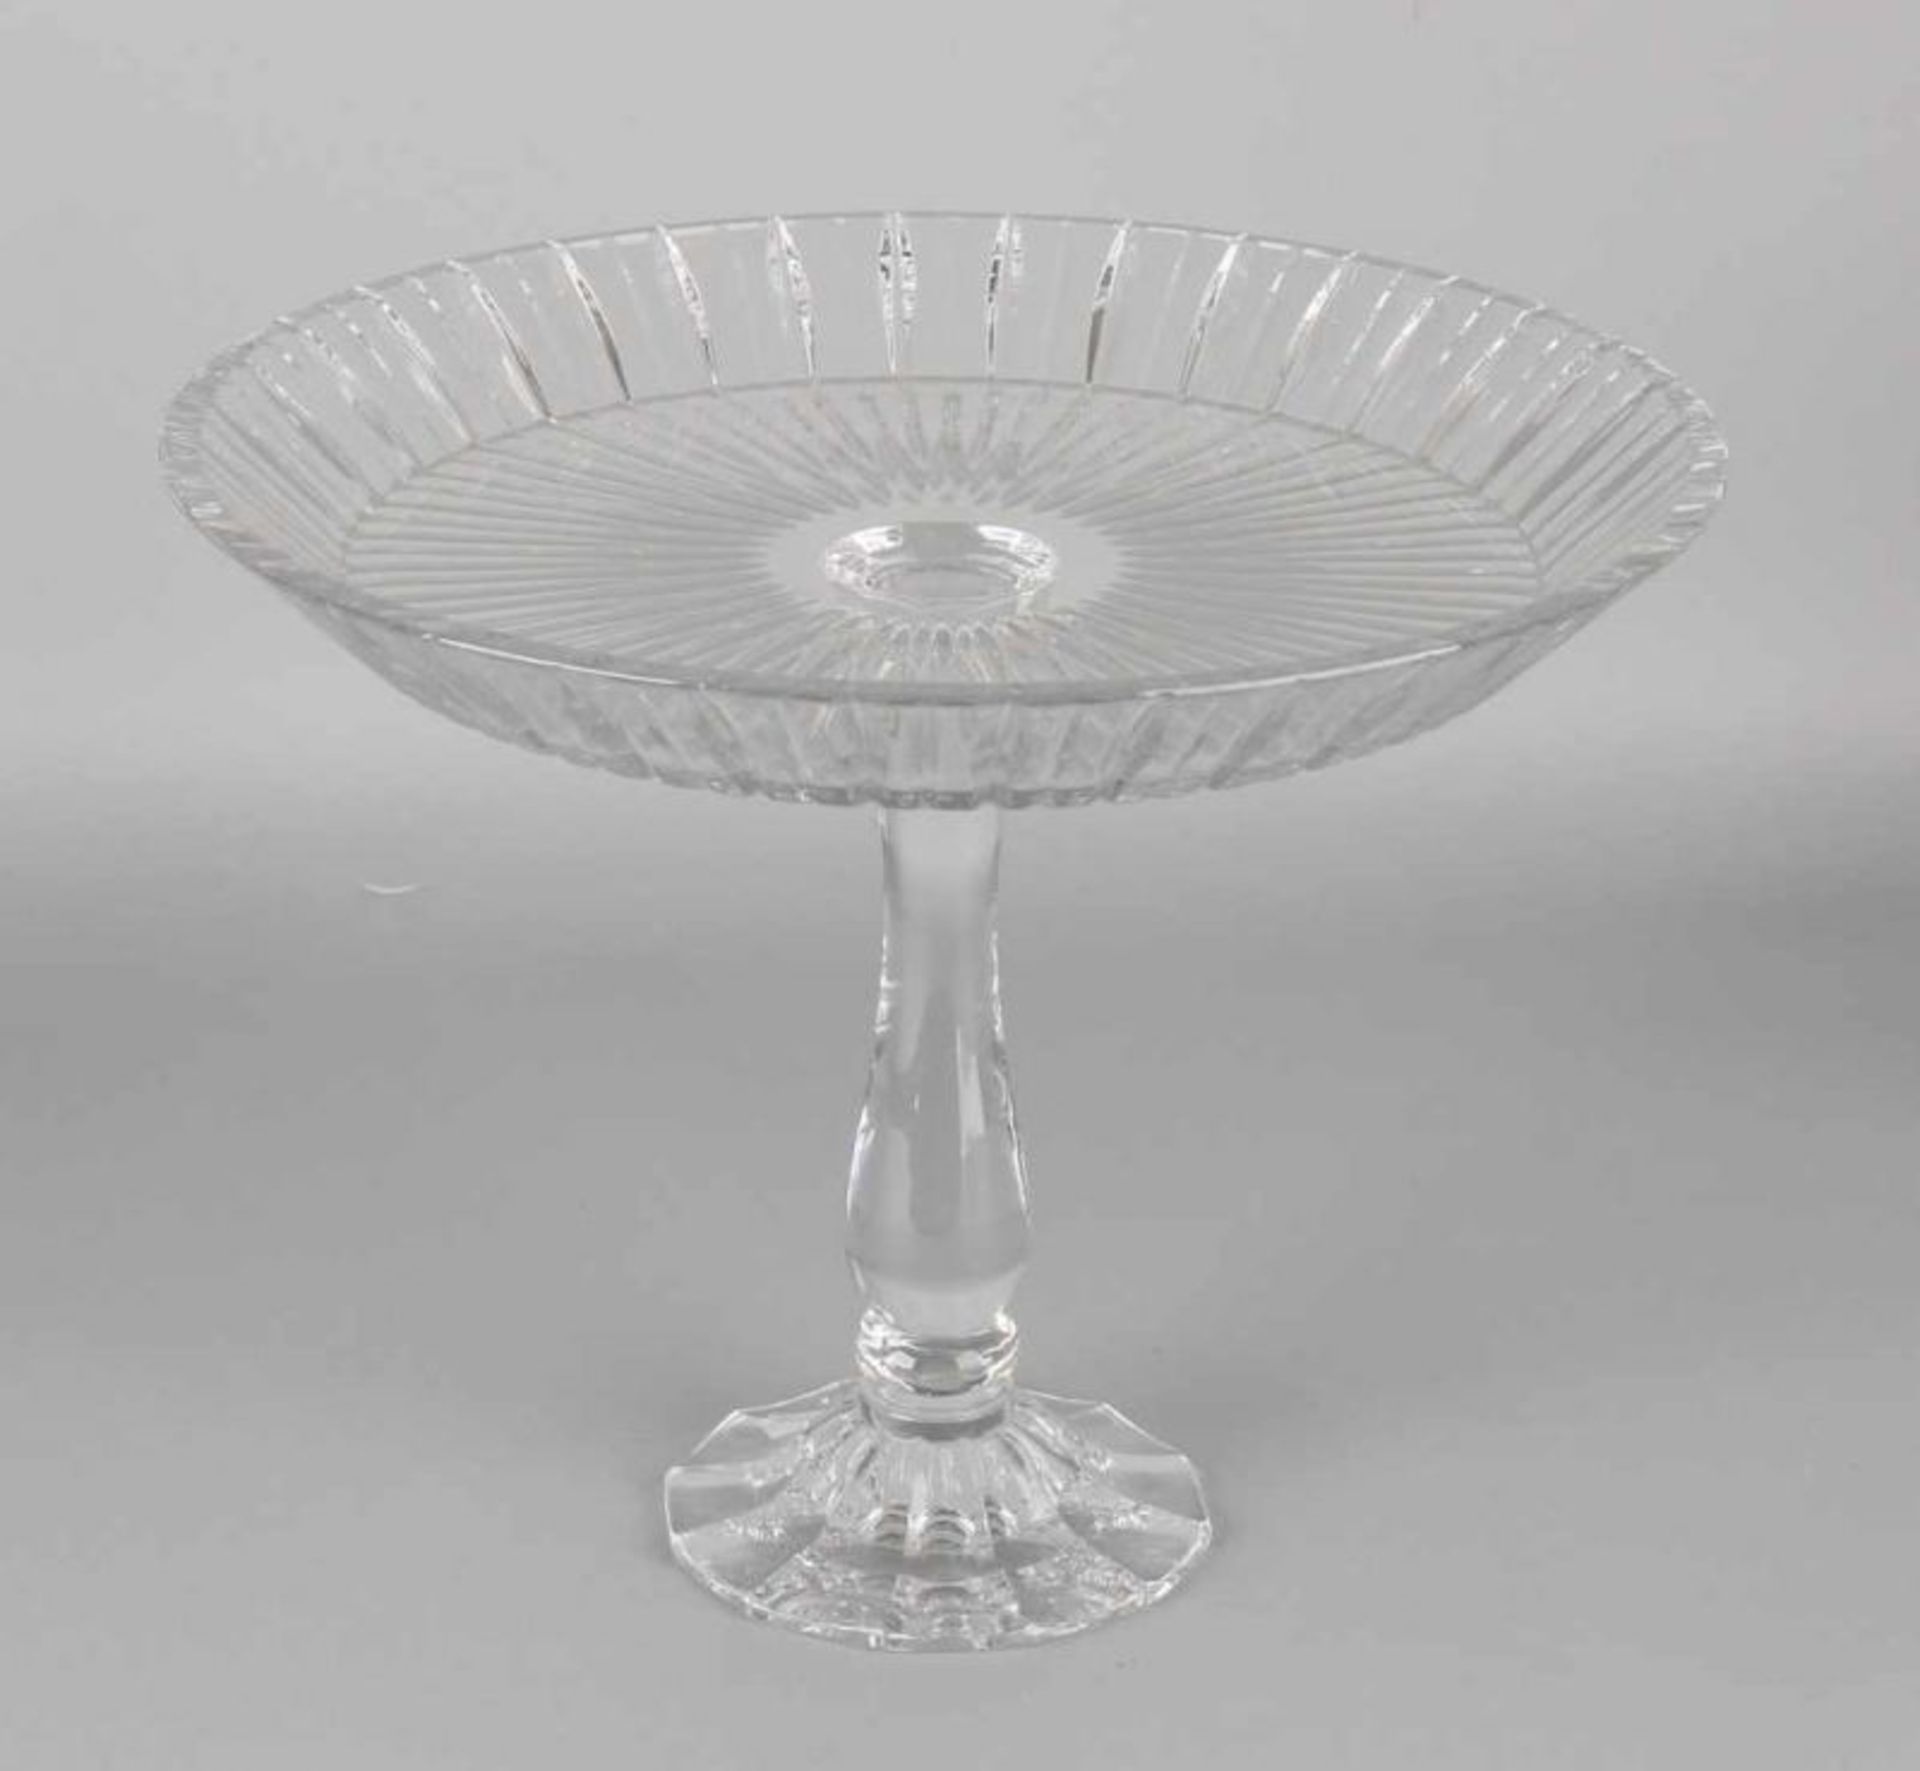 Large crystal glass pie dish on high foot. 20th century. Size: 26.5 x 33 cm dia. In good condition.